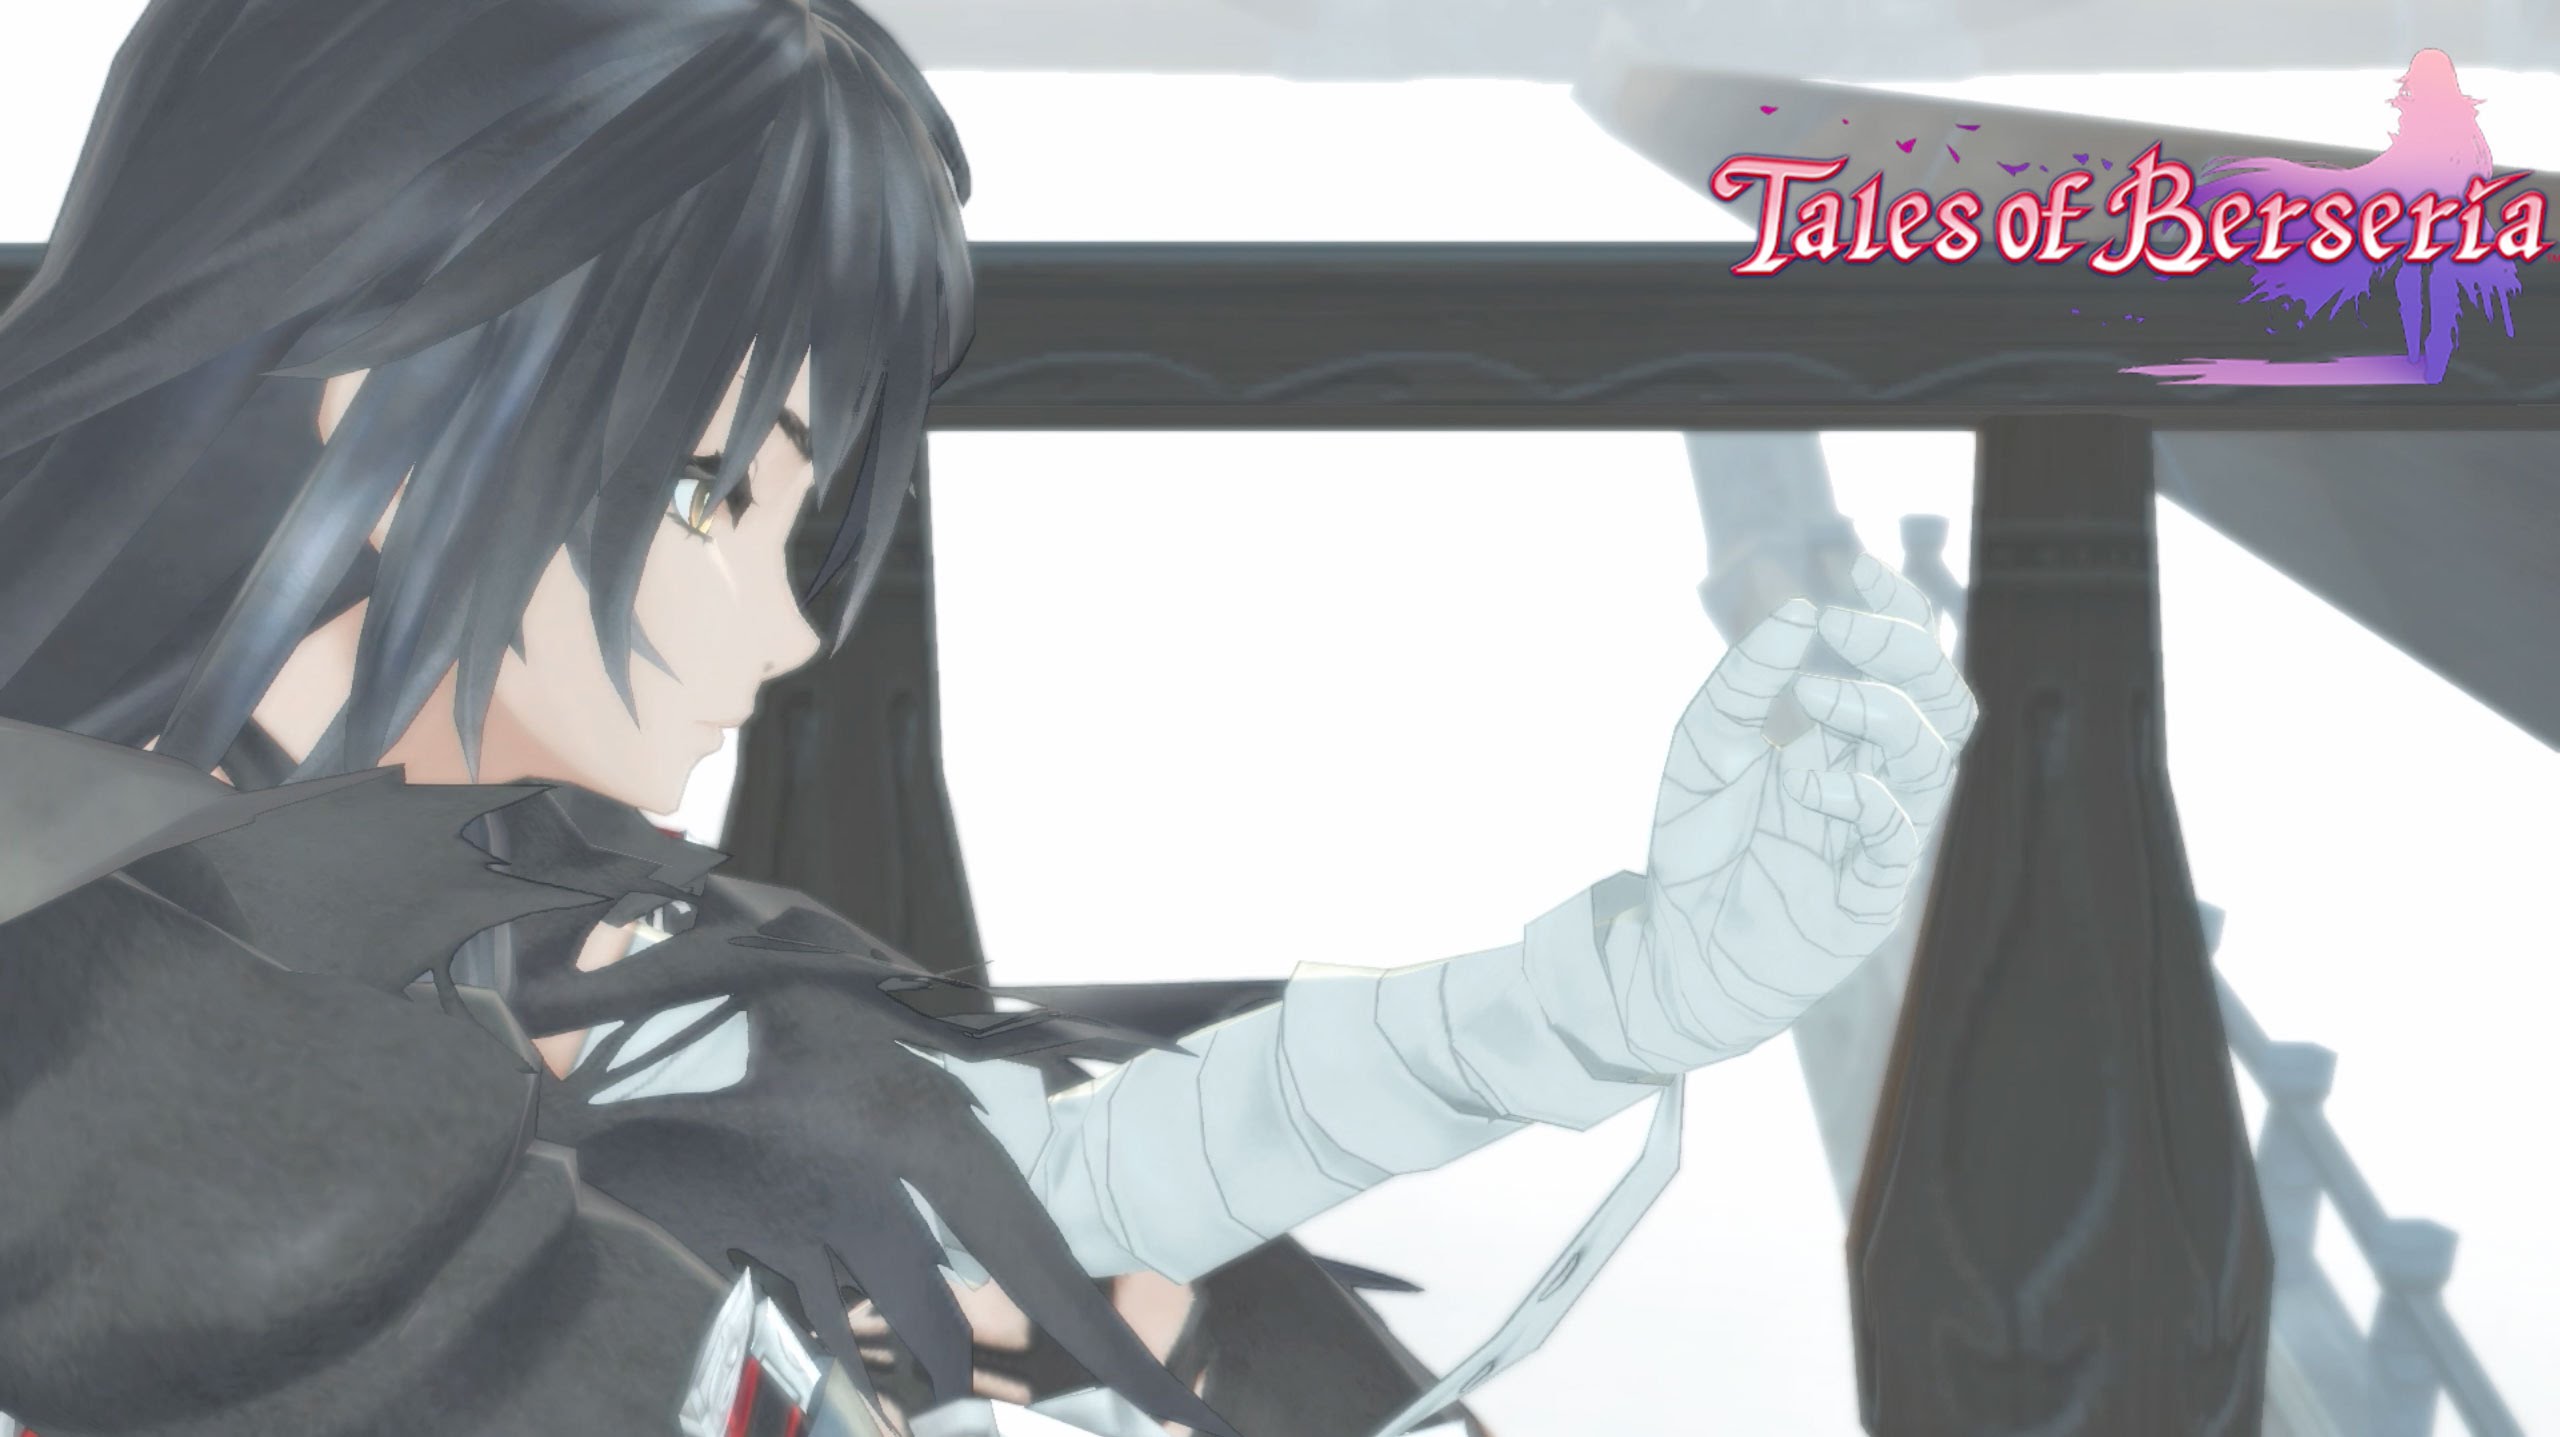 Tales of Berseria - "The Flame" Trailer